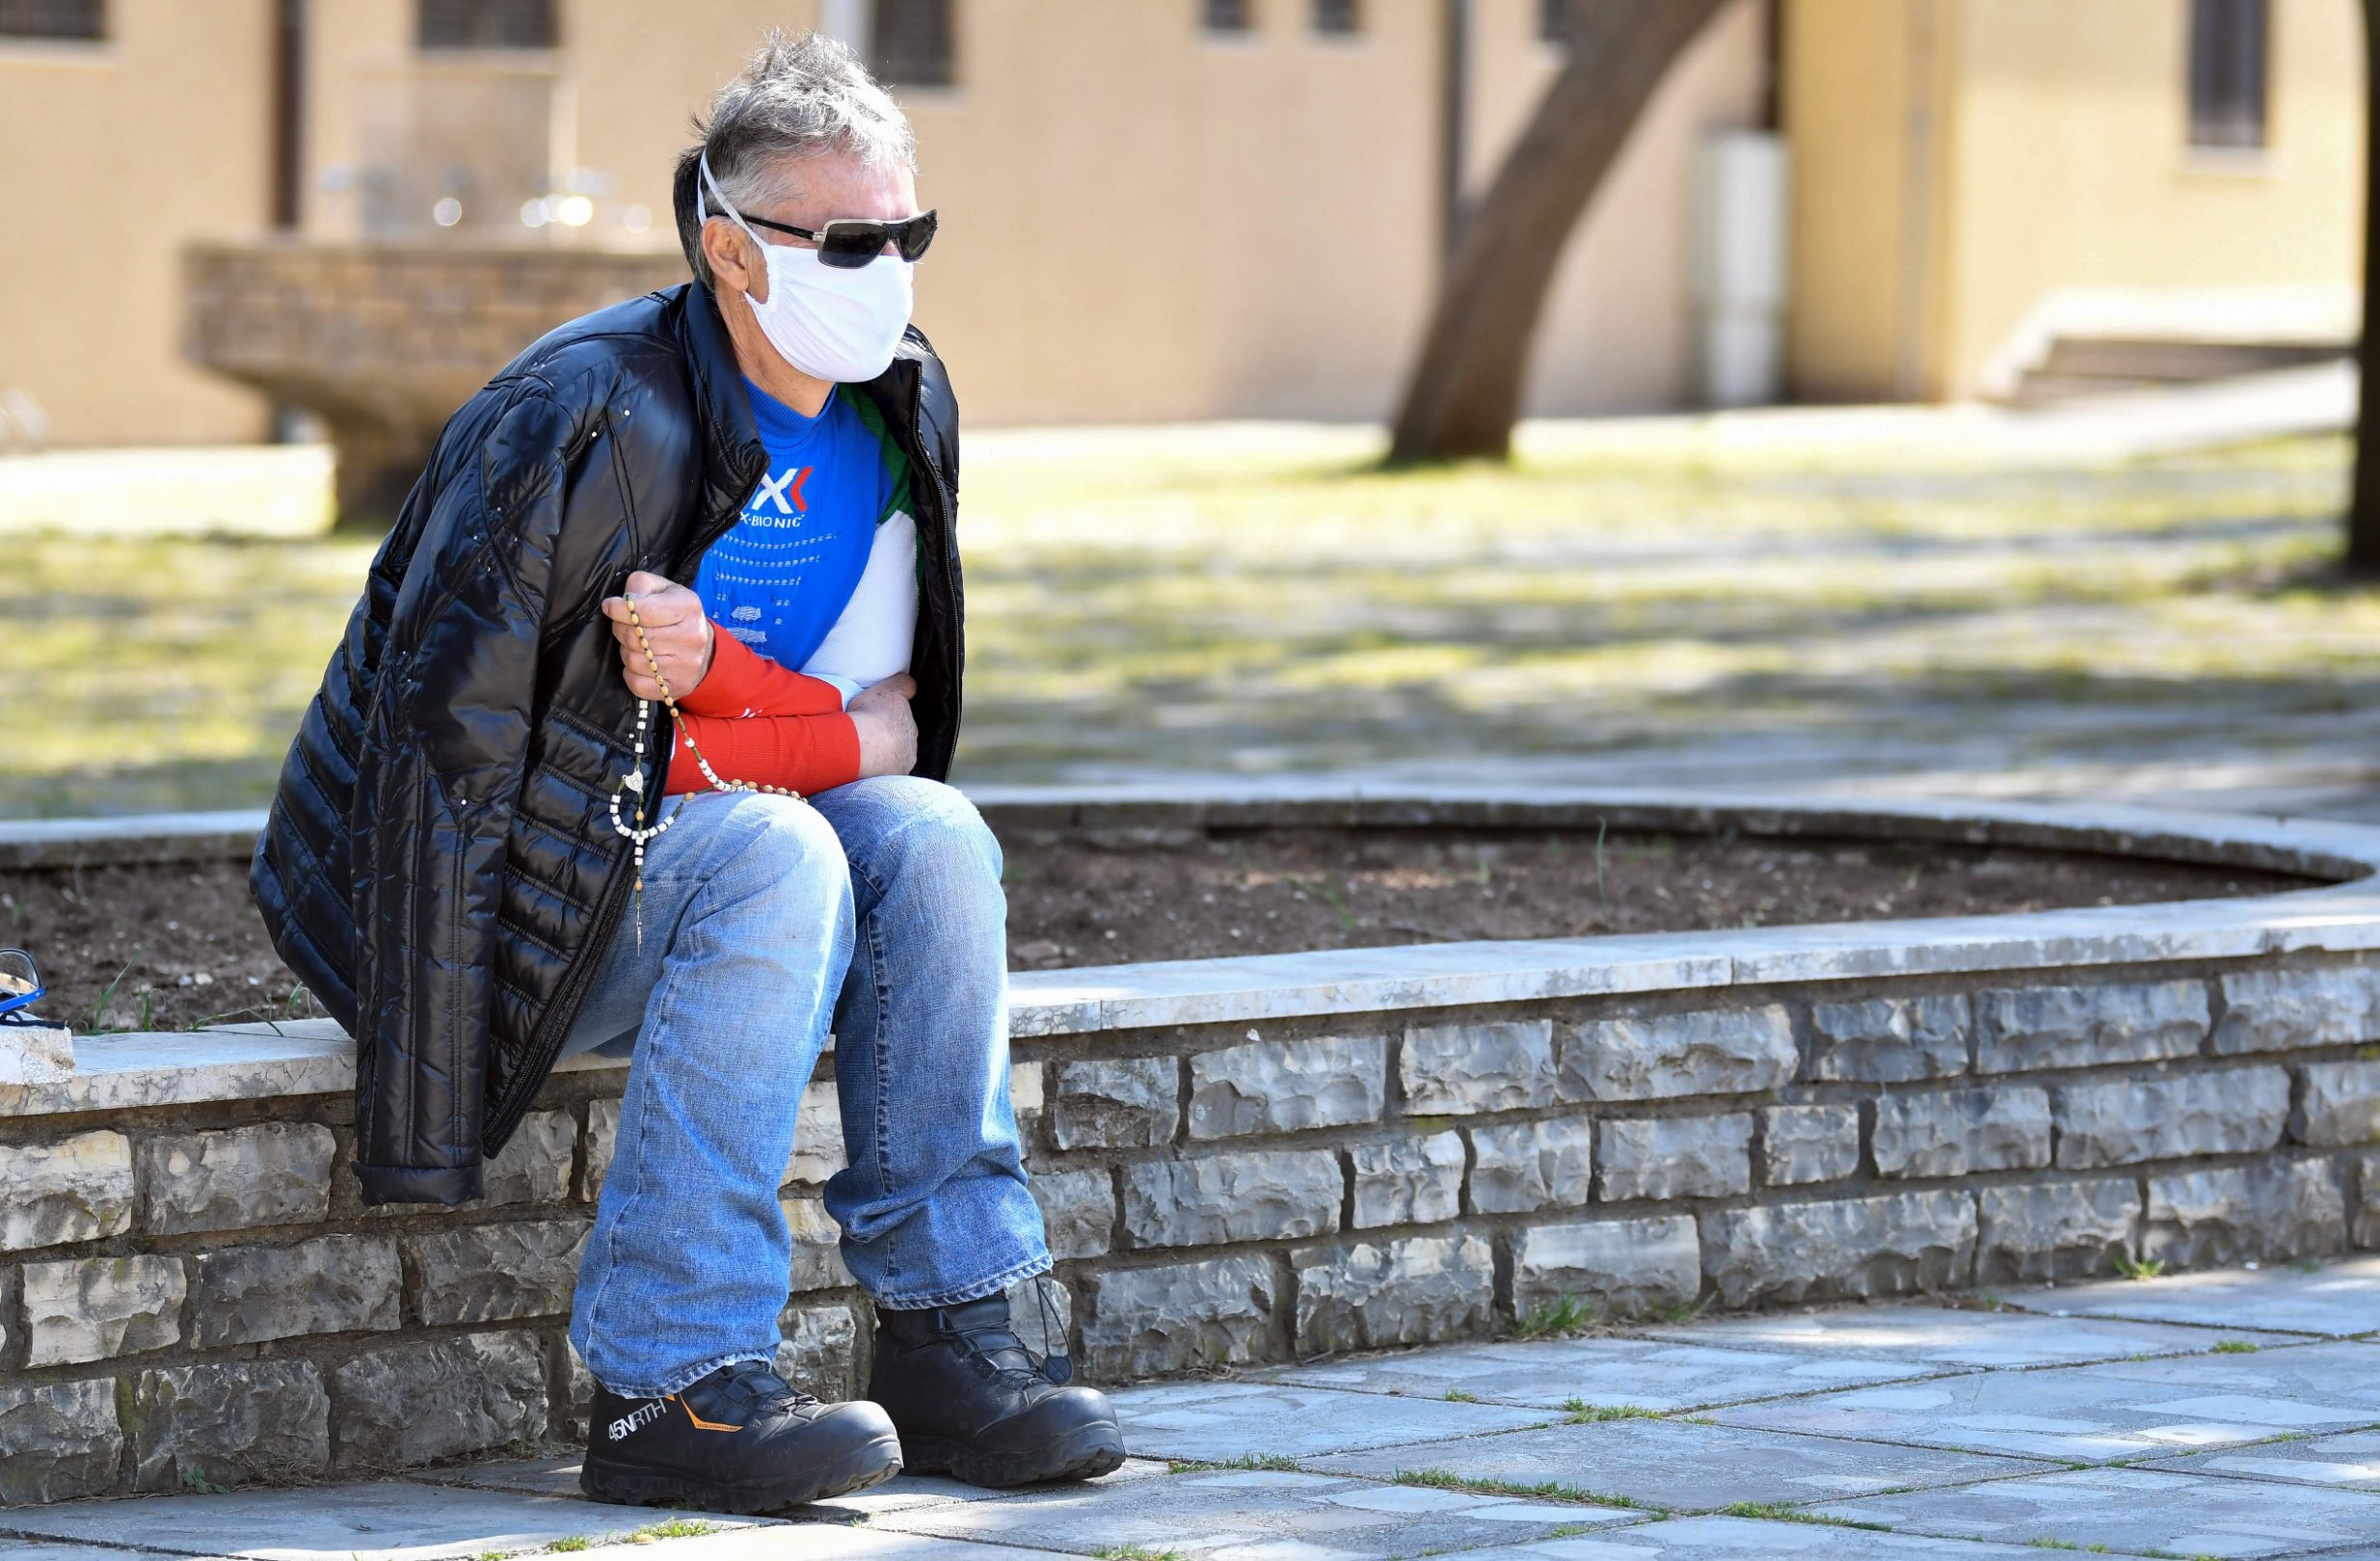 Italian citizen Gino who lives in Bosnia, prays alone in front of the St Jacob church, usually riddled with thousands of Catholic believers, at Marian pilgrimage site, in the southern Bosnian town of Medjugorje, on April 7, 2020 during a lockdown to stop the spread of COVID-19 (novel coronavirus). - Ever since the Virgin Mary was said to appear before six teenagers on a hill in Bosnia four decades ago, pilgrims have flocked to the town of Medjugorje, eager to witness a miracle. (Photo by ELVIS BARUKCIC / AFP)